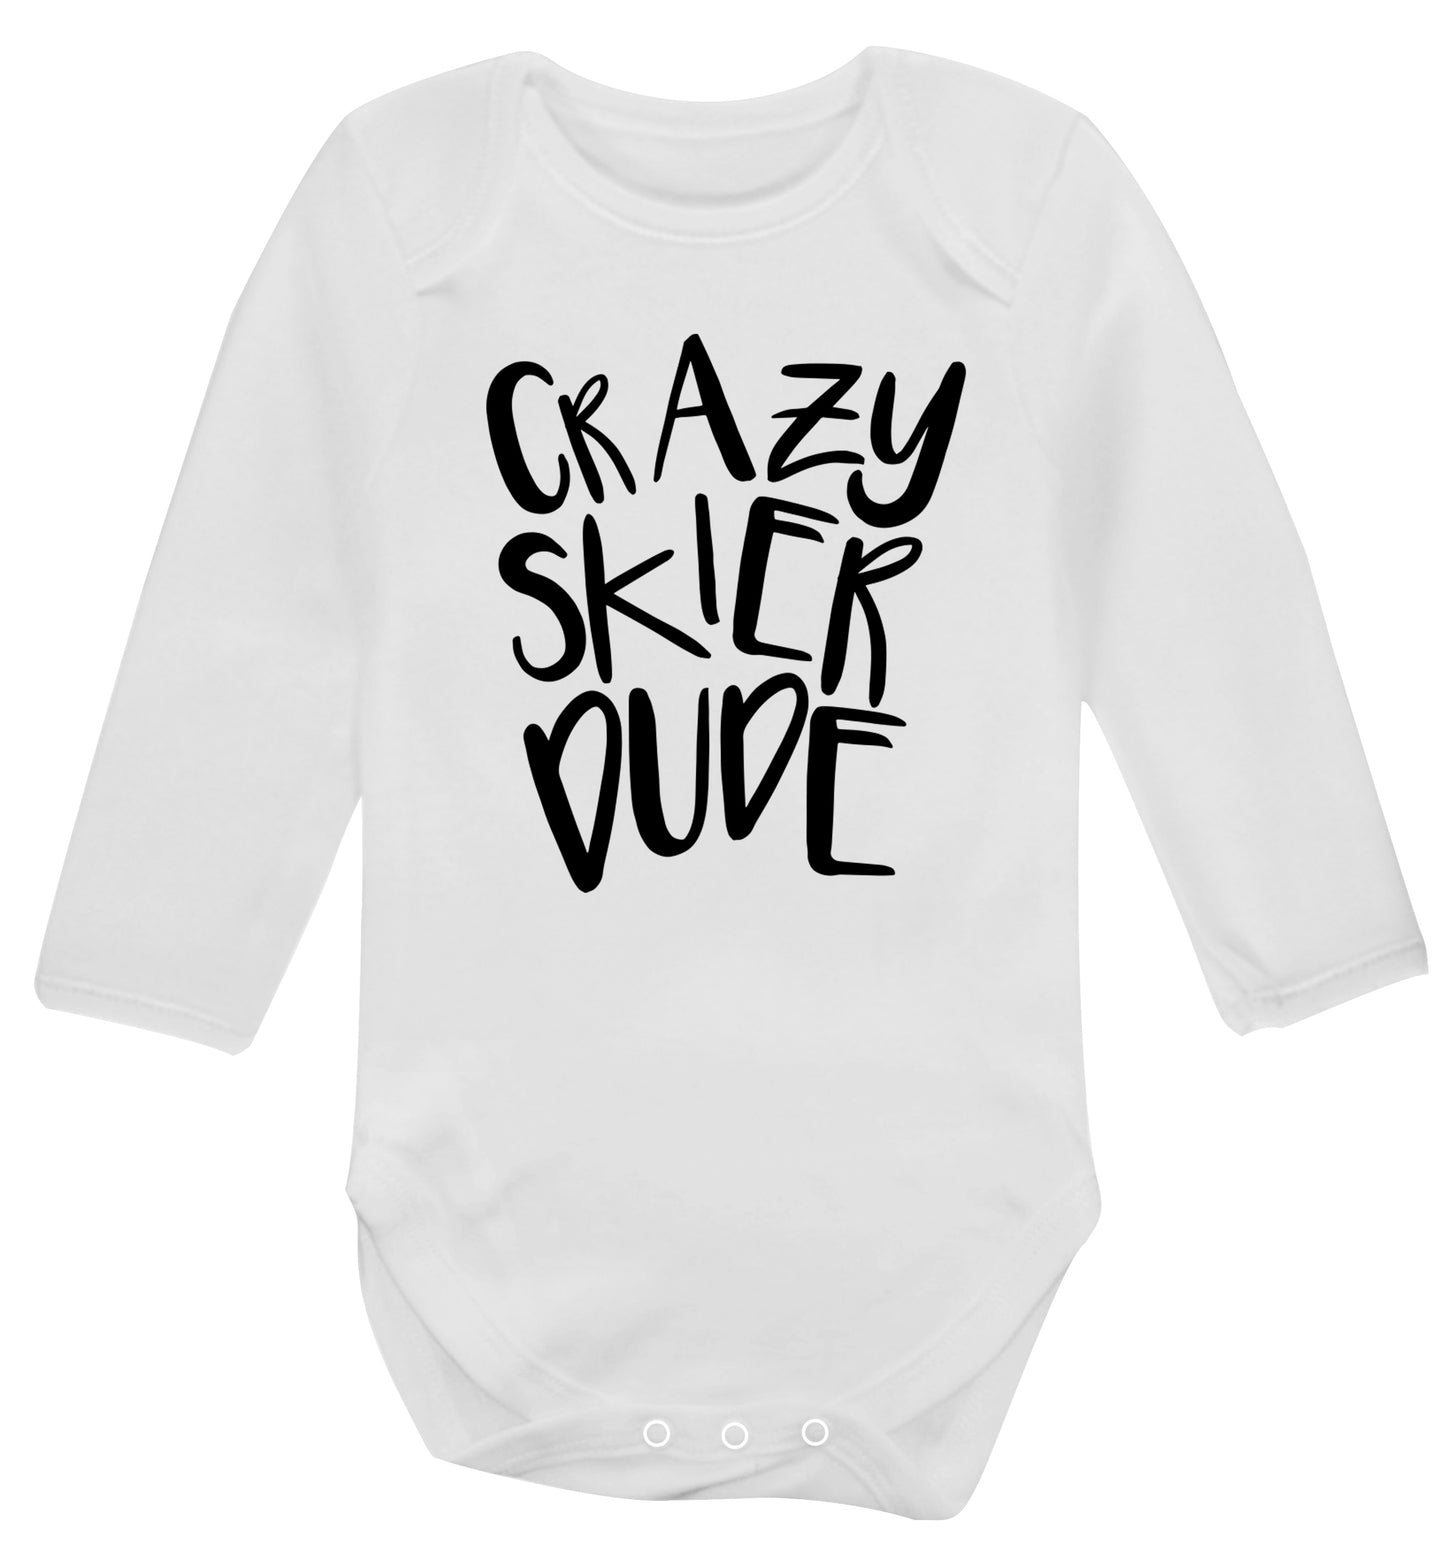 Crazy skier dude Baby Vest long sleeved white 6-12 months